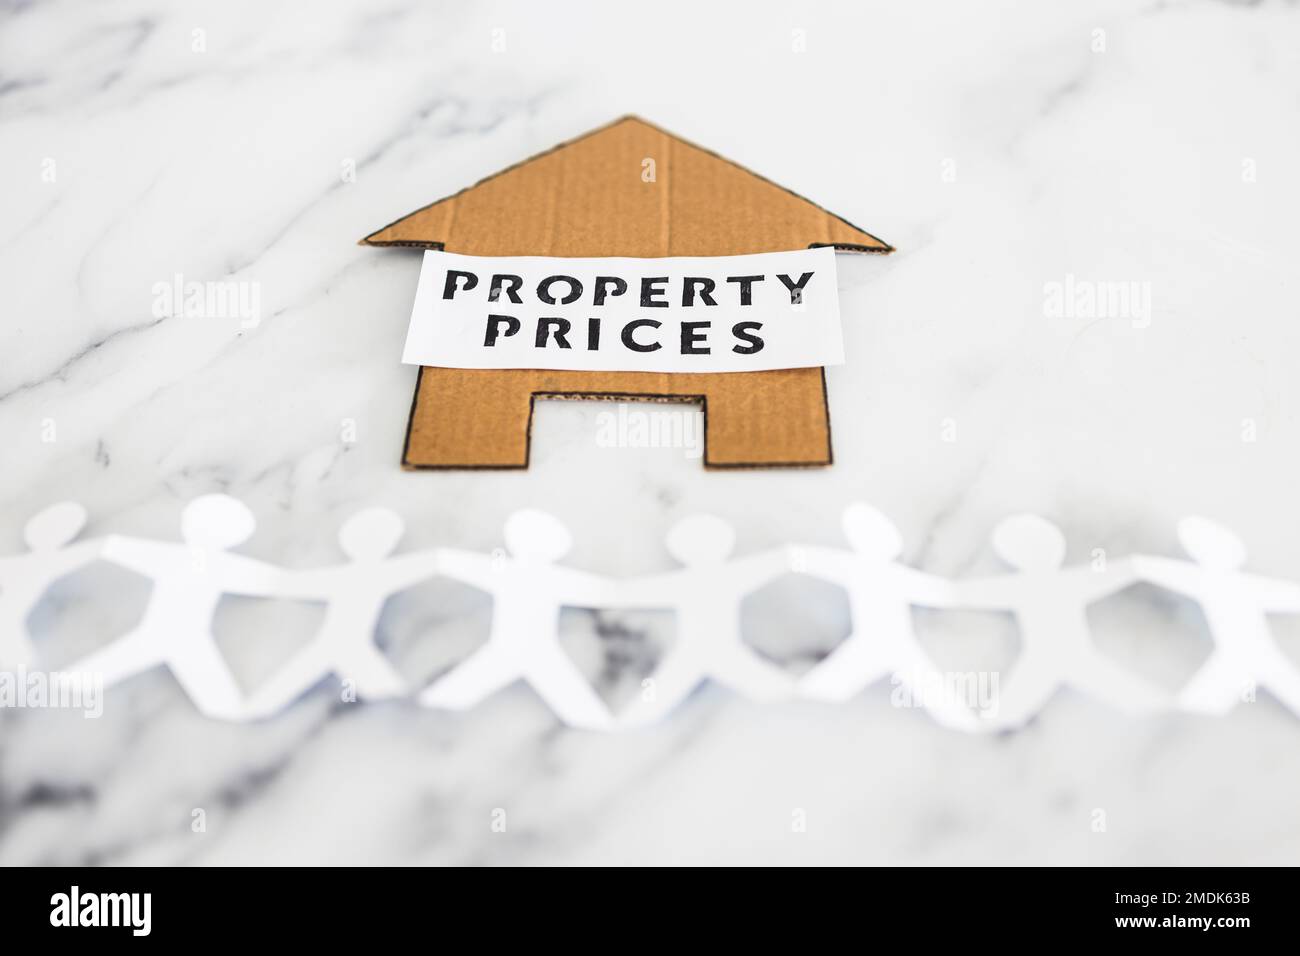 real estate affordability conceptual image, property prices text on cardboard house with paper people chain underneath symbol of potential clients Stock Photo